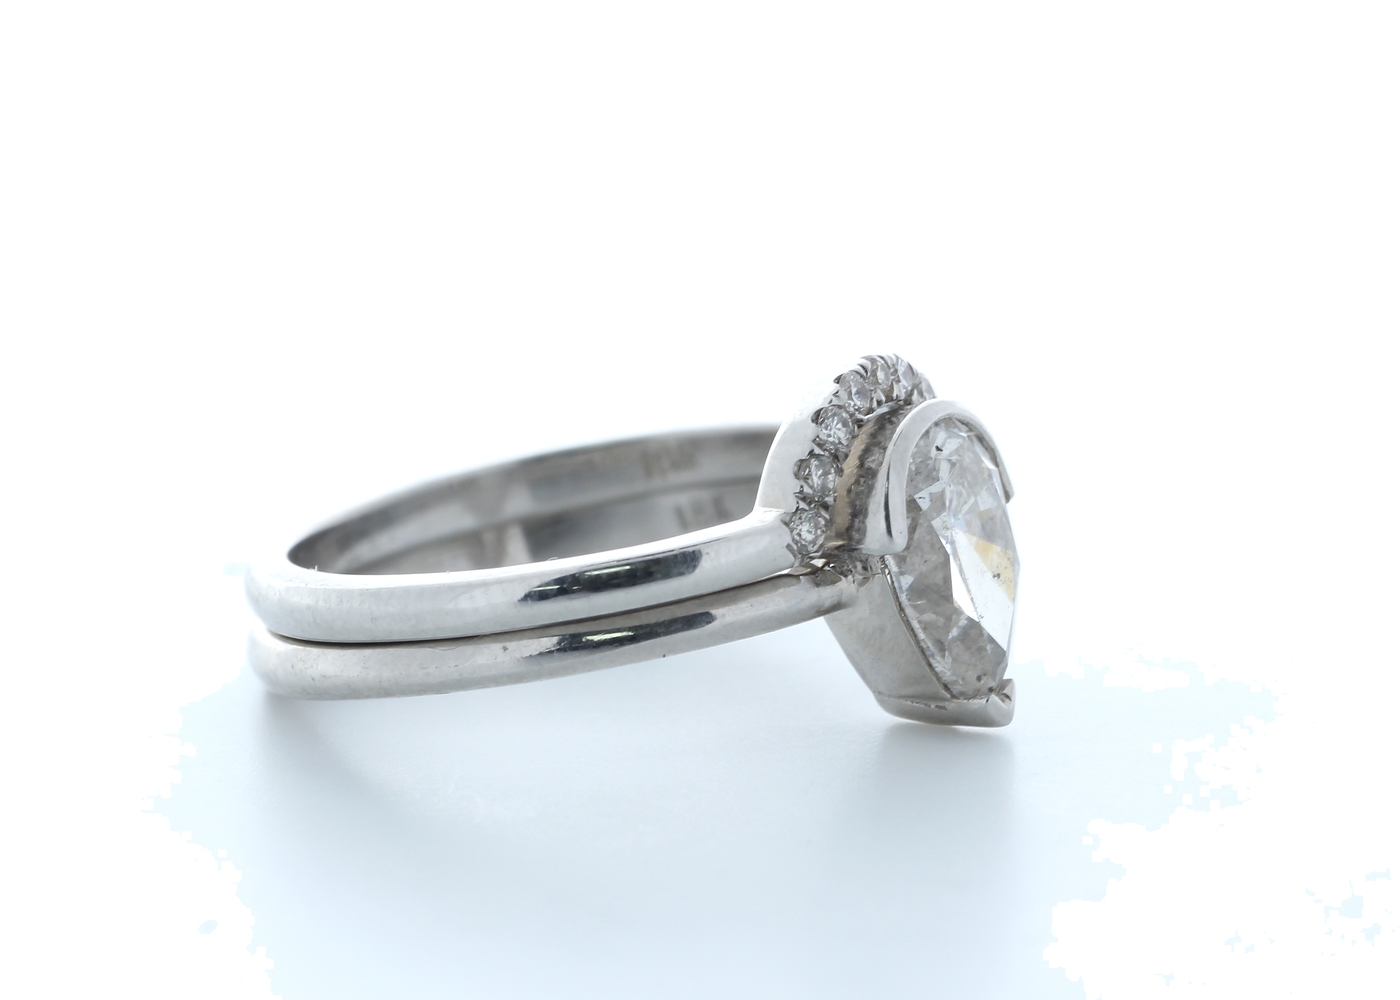 18ct White Gold Pear Shape Diamond Ring With Matching Band 1.16 (1.07) Carats - Image 3 of 4